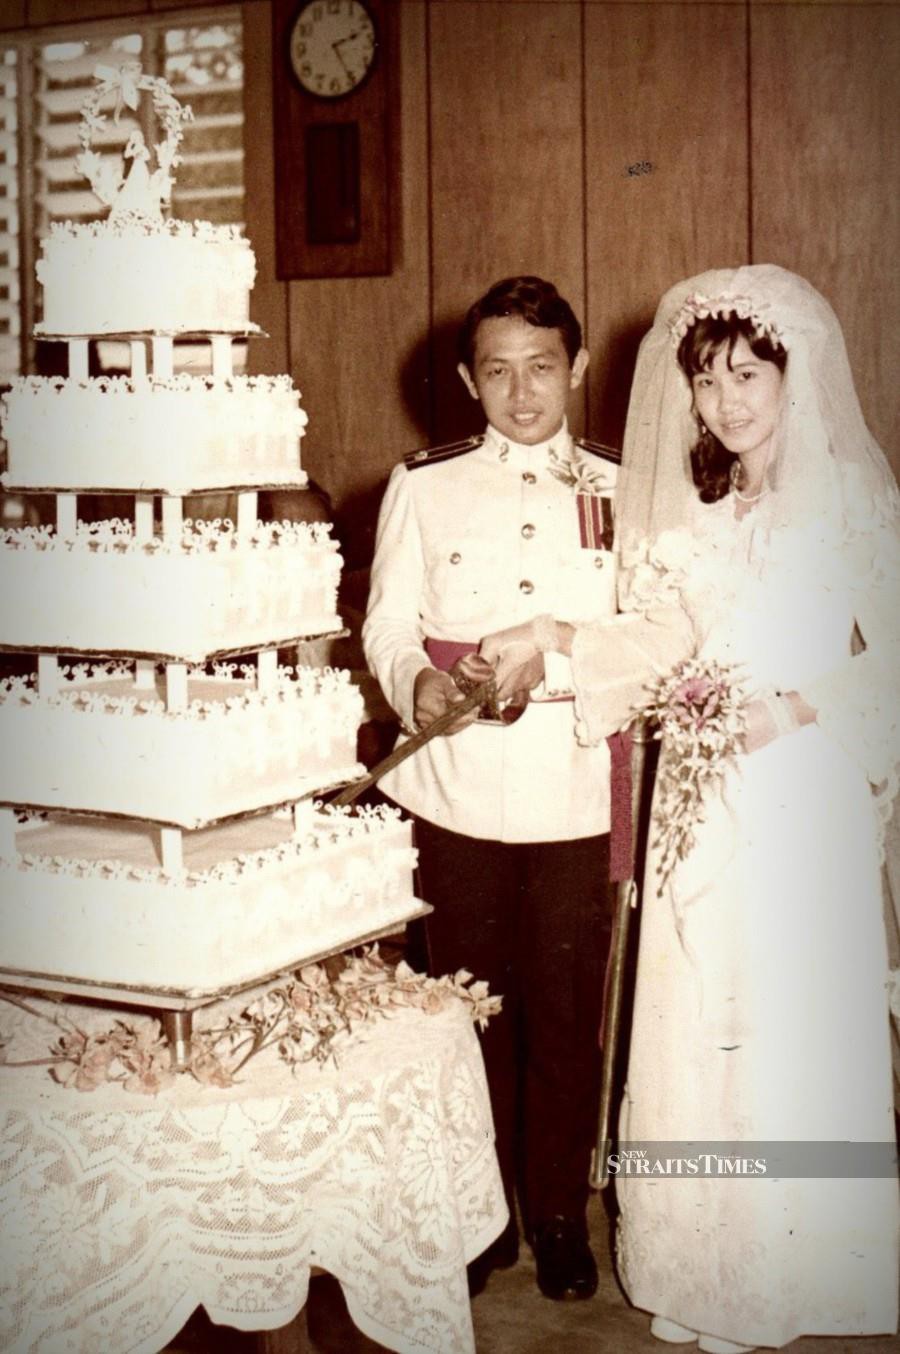  Cutting a magnificent five-tier wedding cake during the banquet.